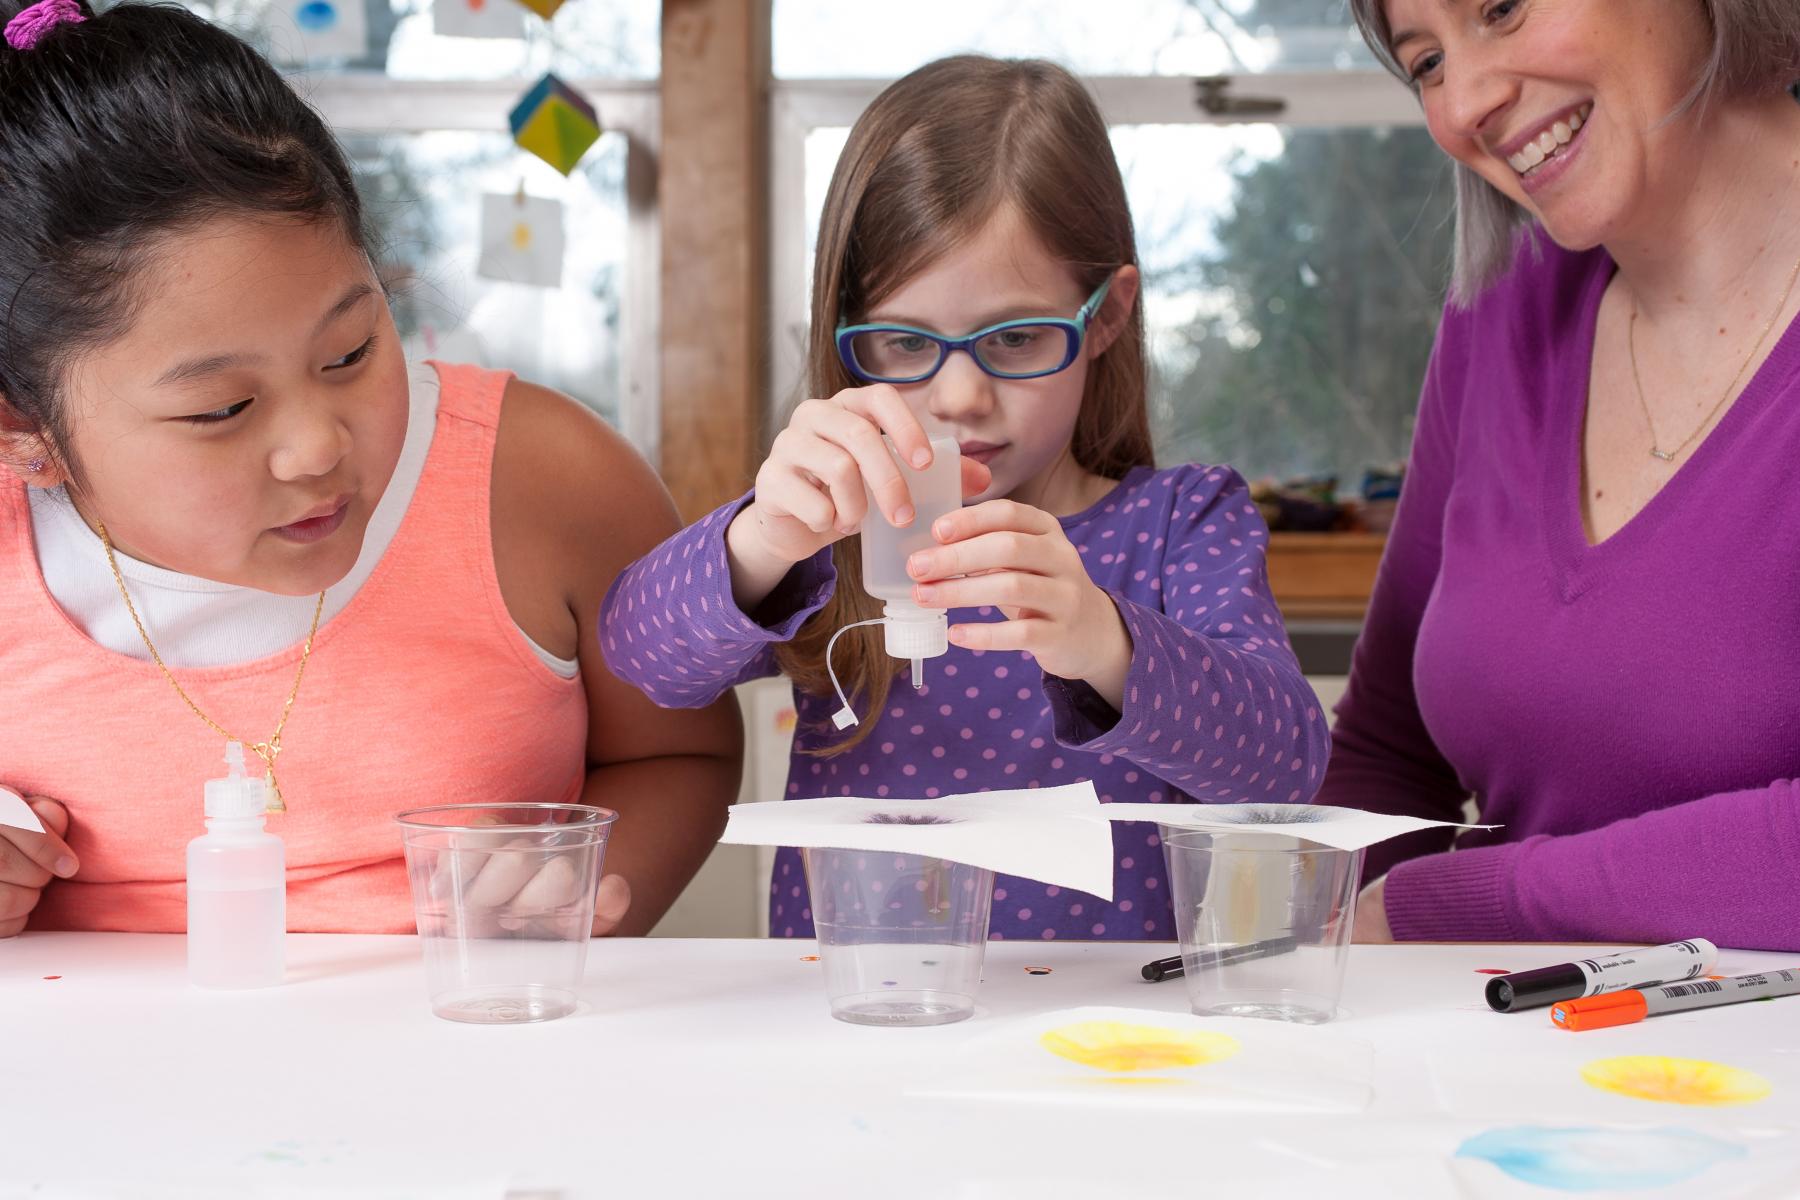 Three children work on a science project together